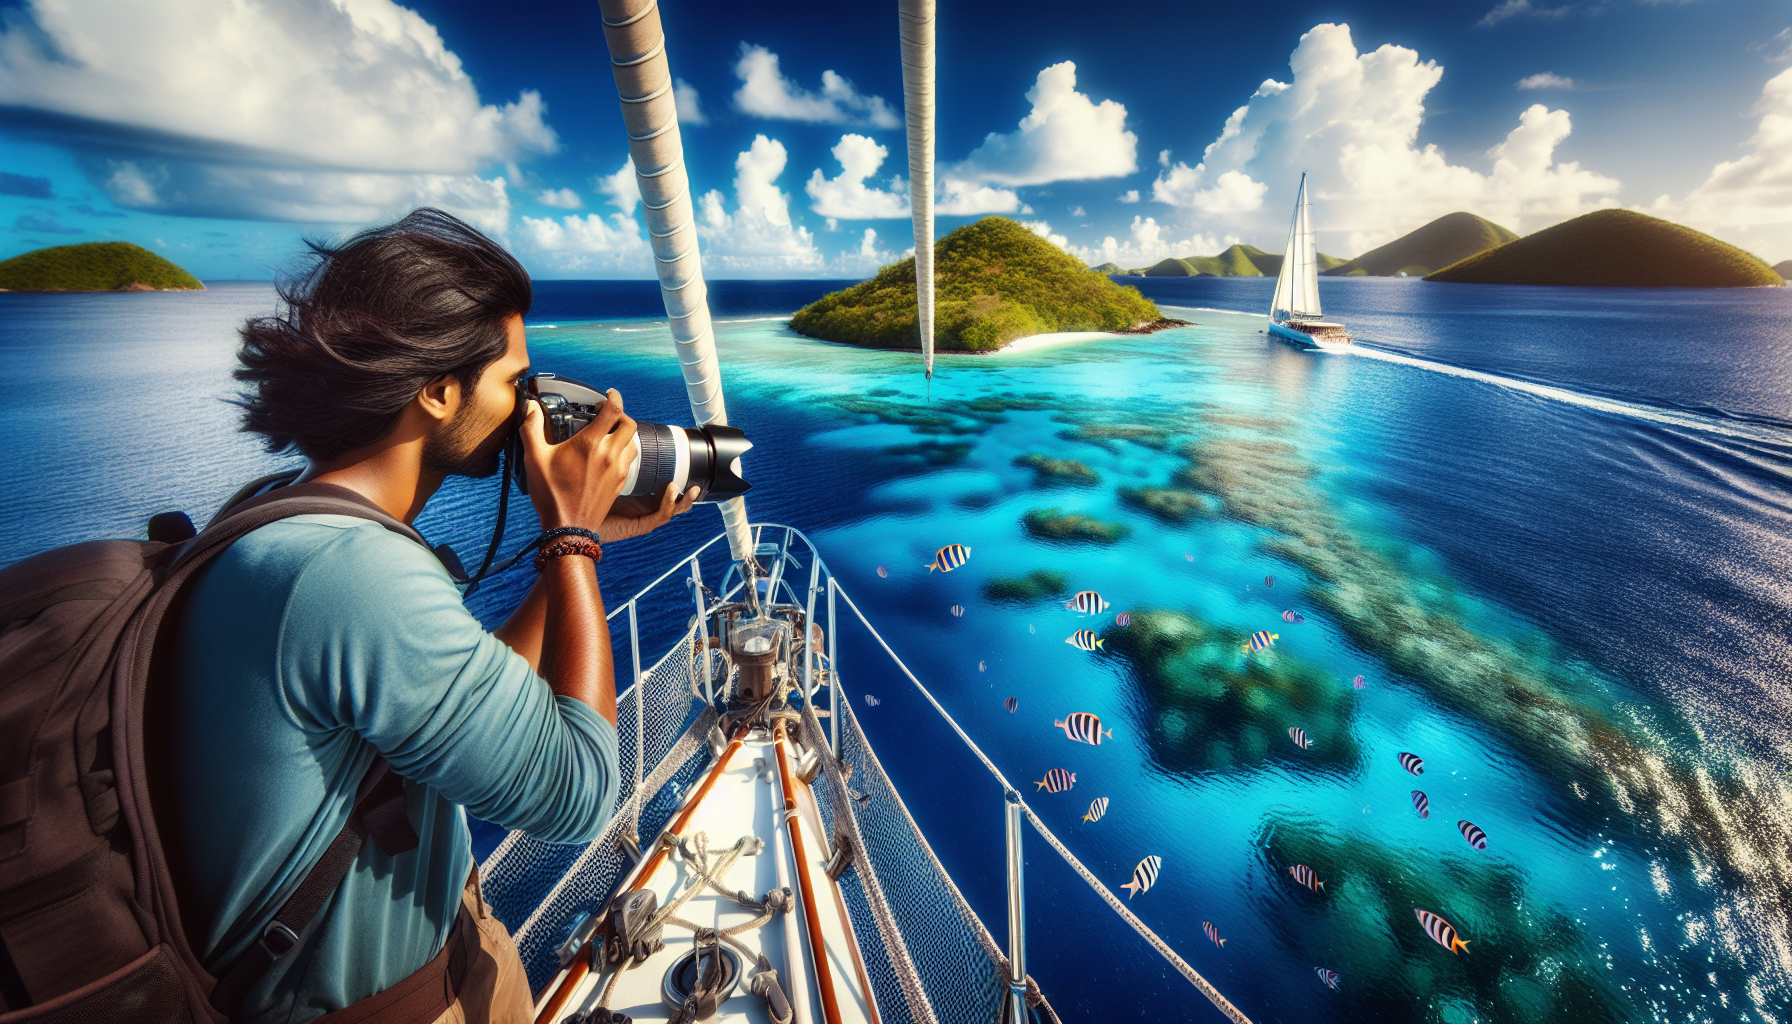 discover expert tips on how to sail the caribbean in style with luxurious yacht charters, exclusive island hopping, and unforgettable experiences along the way.